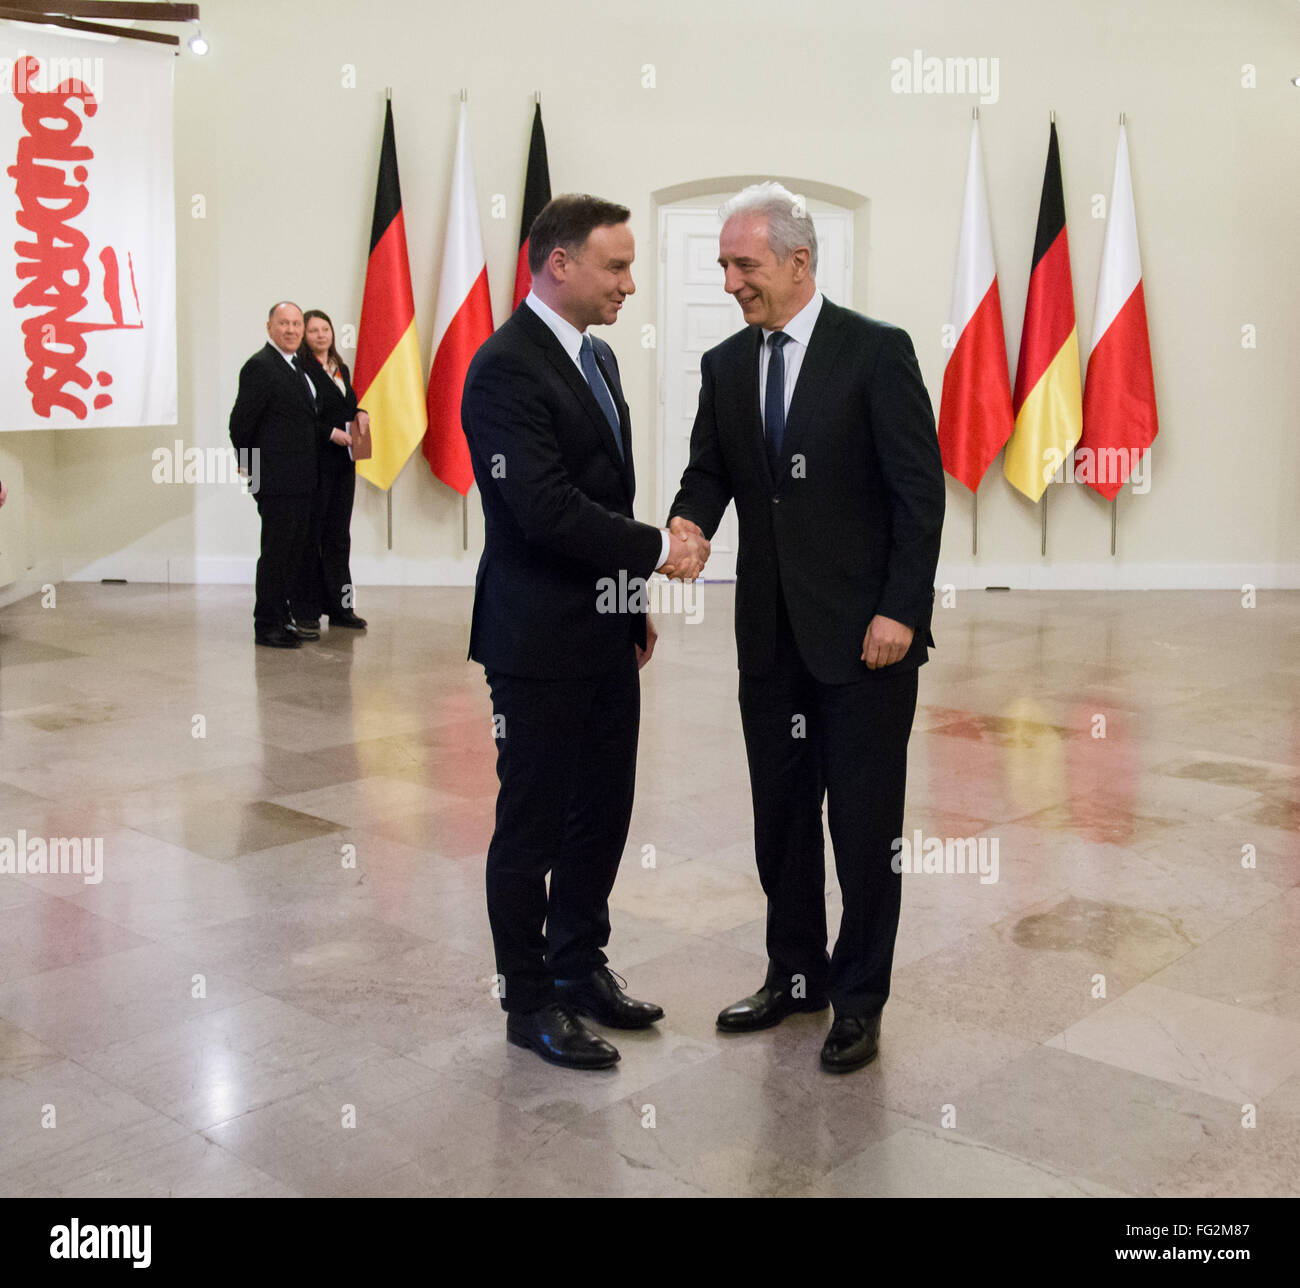 Polish President Andrzej Duda (L) welcomes President of the German Bundesrat Stanislaw Tillich (R) in Presidential Palace on 17 February 2016 in Warsaw, Poland. Stock Photo